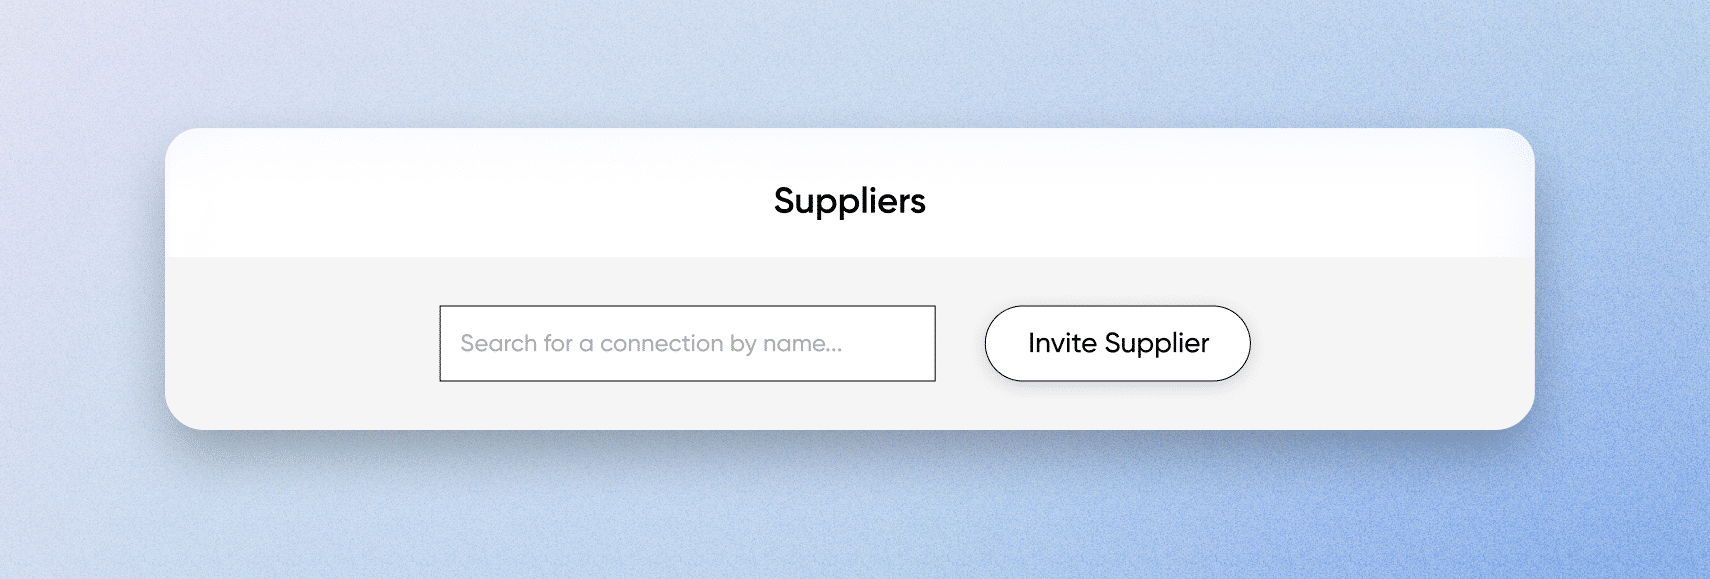 With our latest product update, you can send one-click invitations to new suppliers in fabric Dropship.